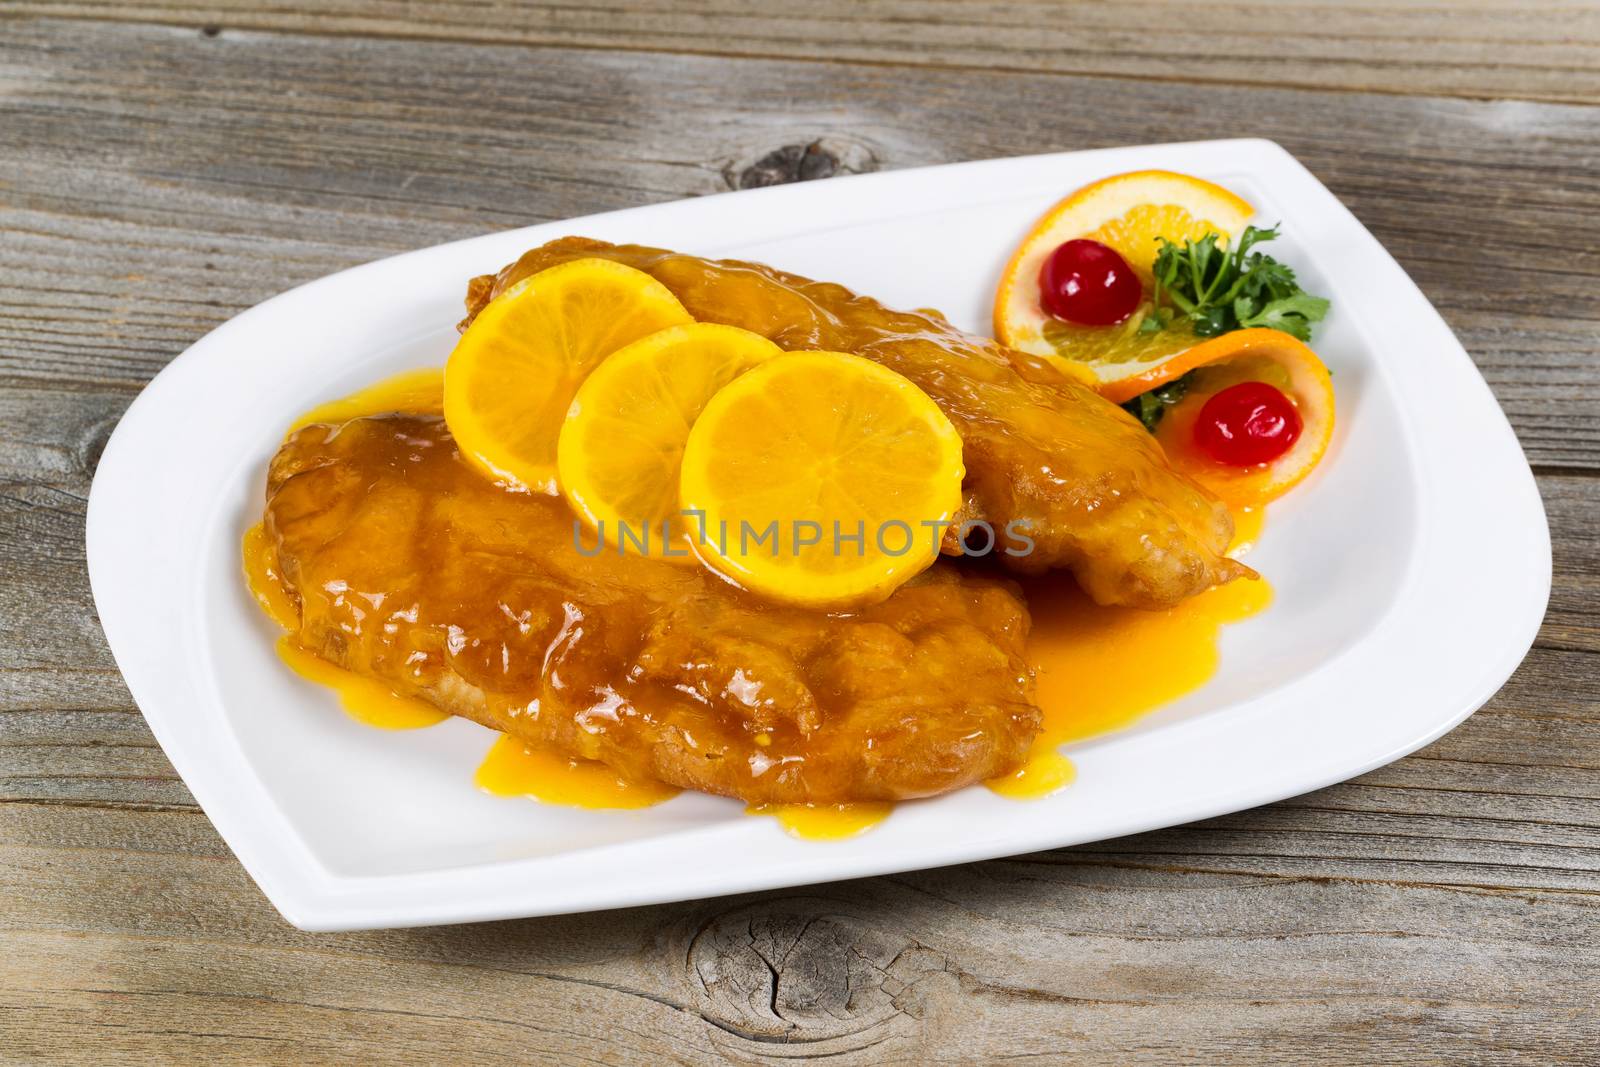 Fried chicken with lemon sauce ready to eat by tab1962